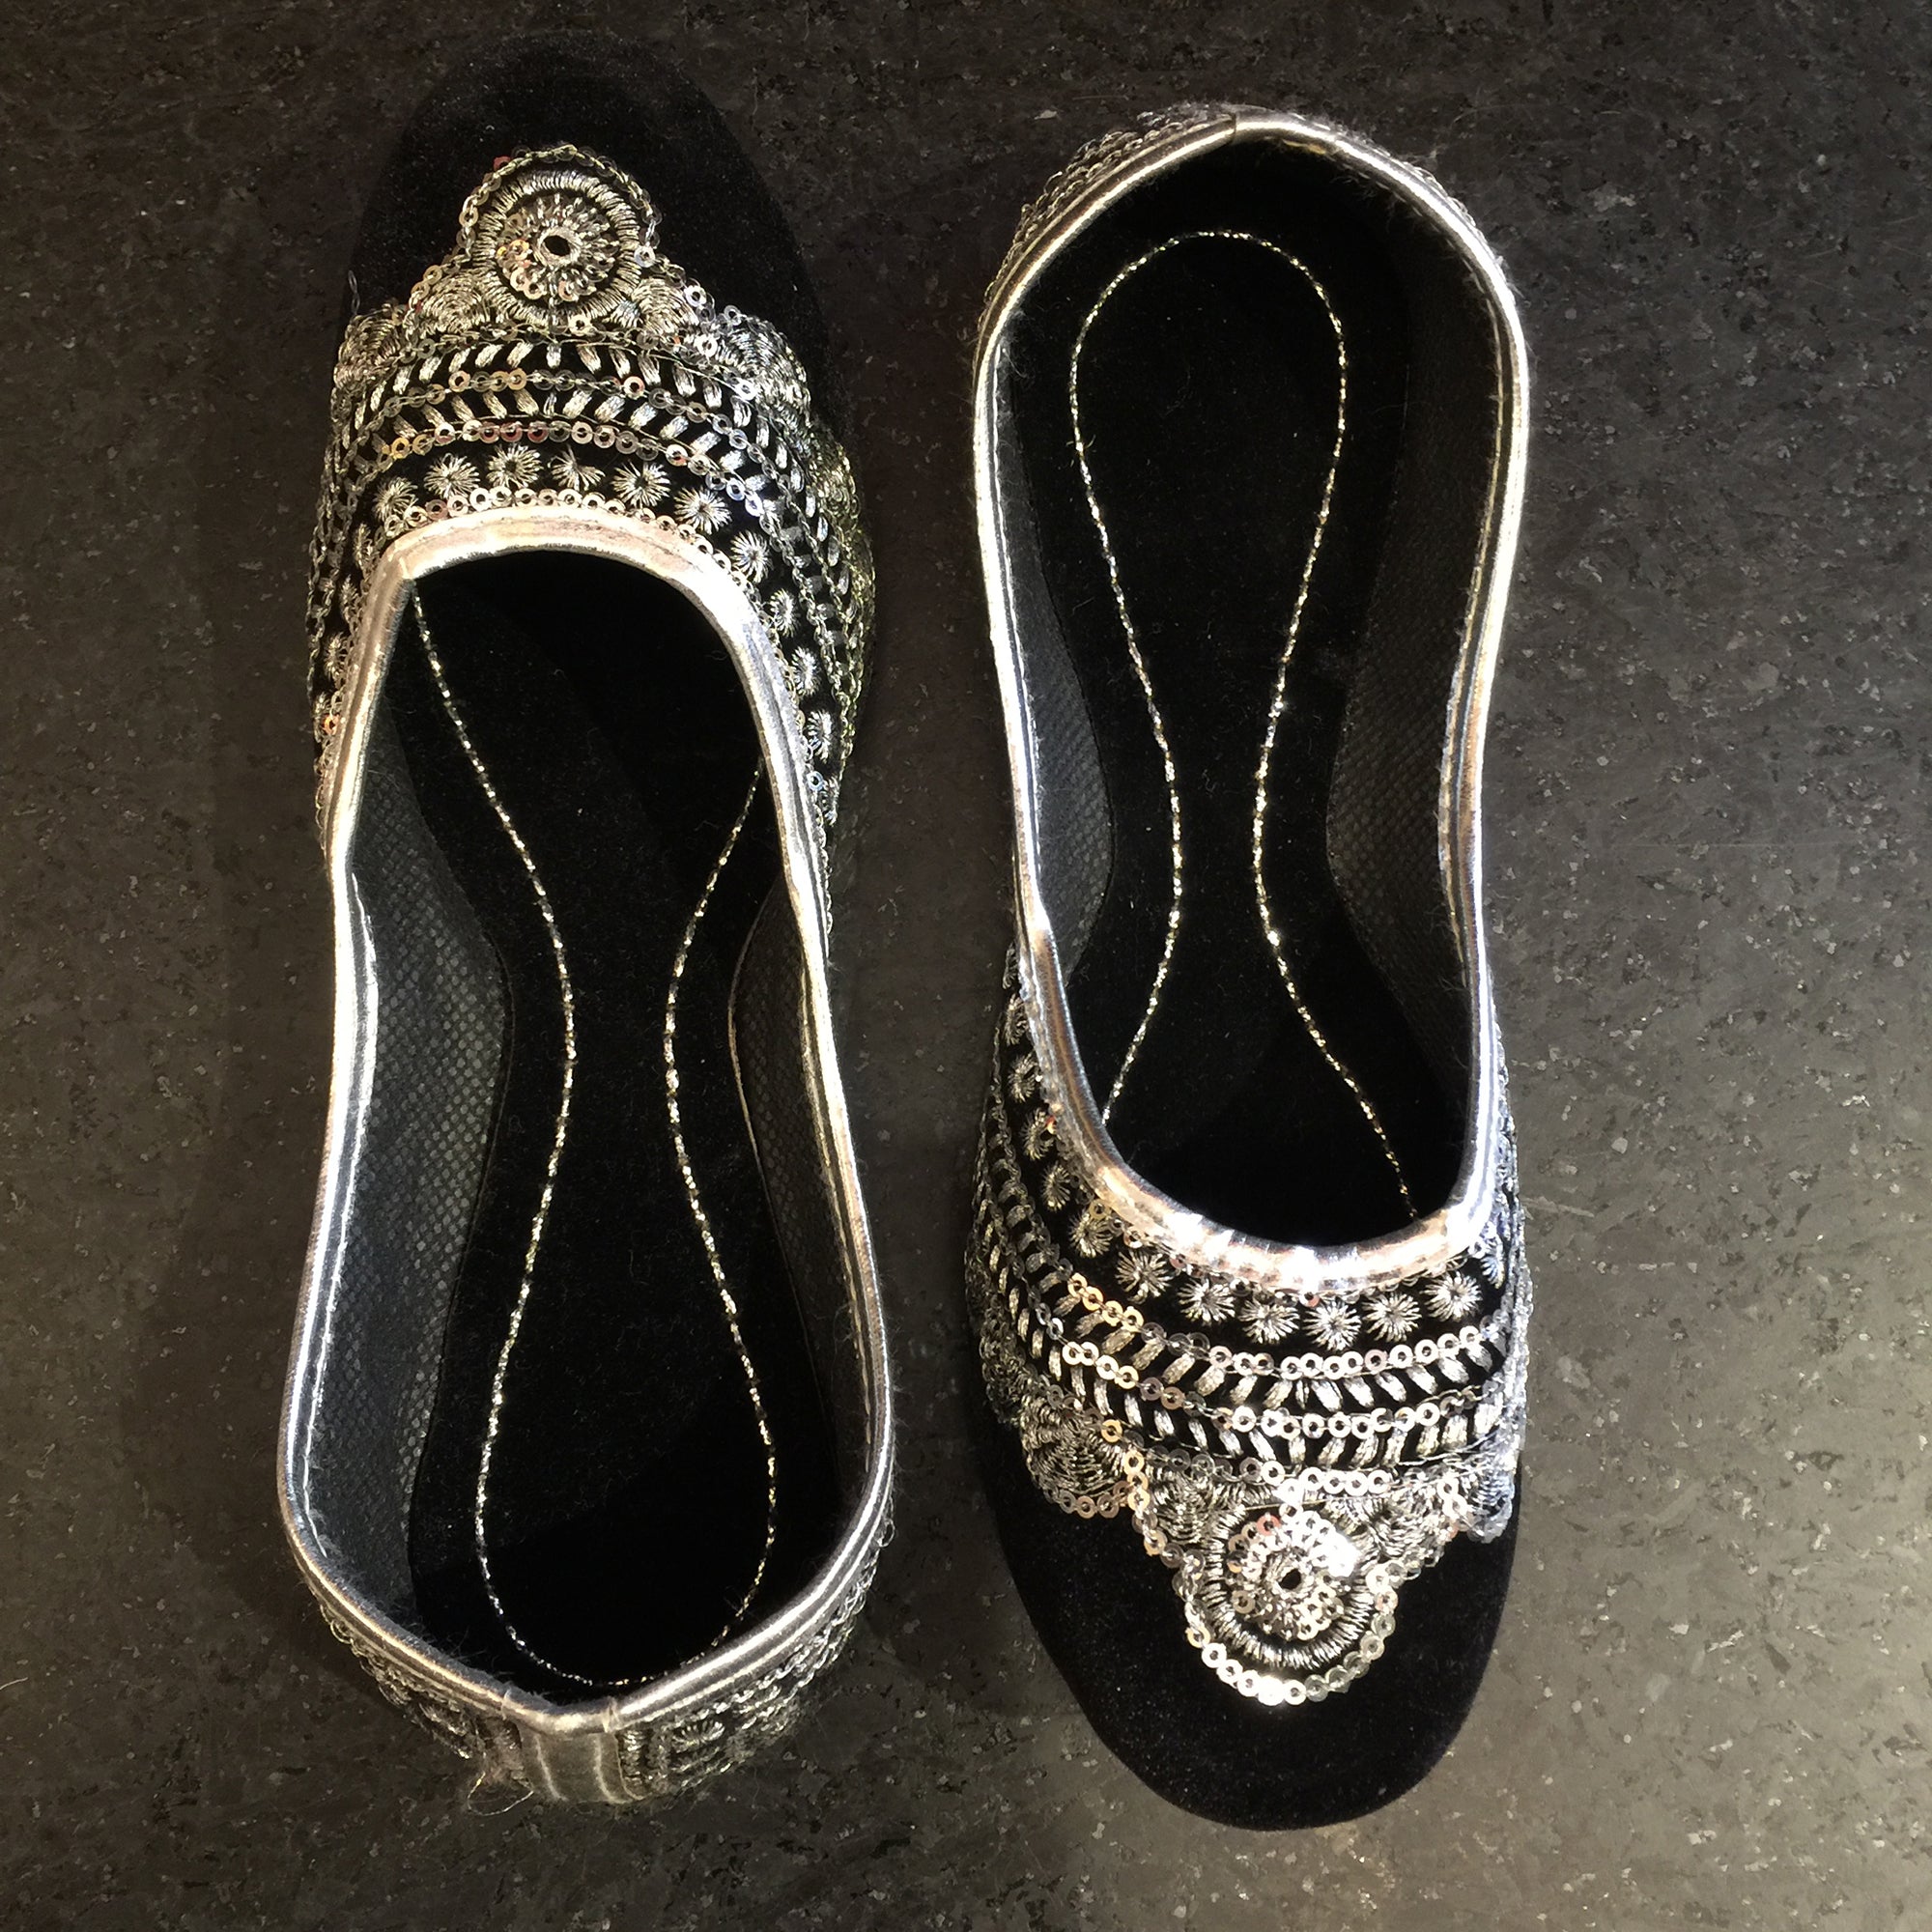 Black Velvet Jutti with Silver Sequins - Vintage India NYC